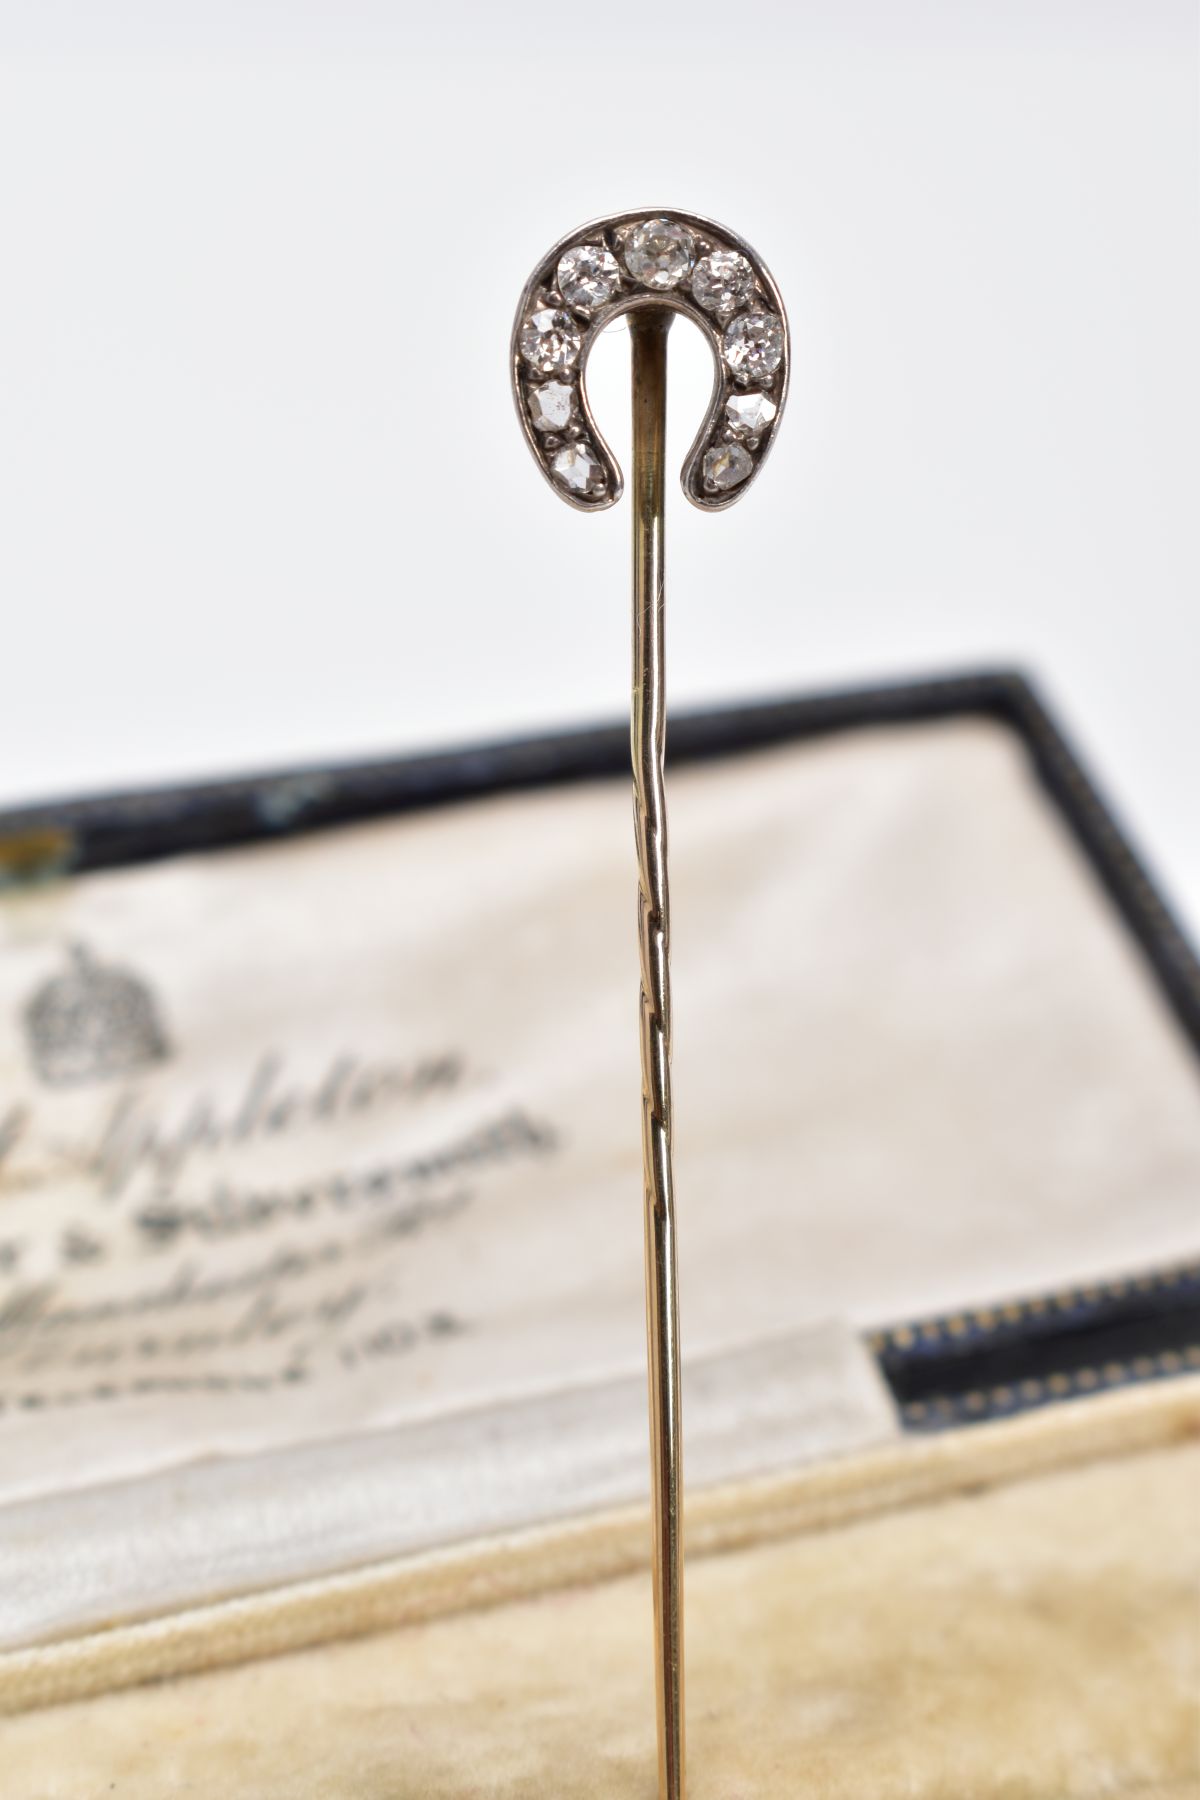 AN EDWARDIAN DIAMOND STICK PIN, the yellow metal pin in the form of a horse shoe, set with five - Image 2 of 3